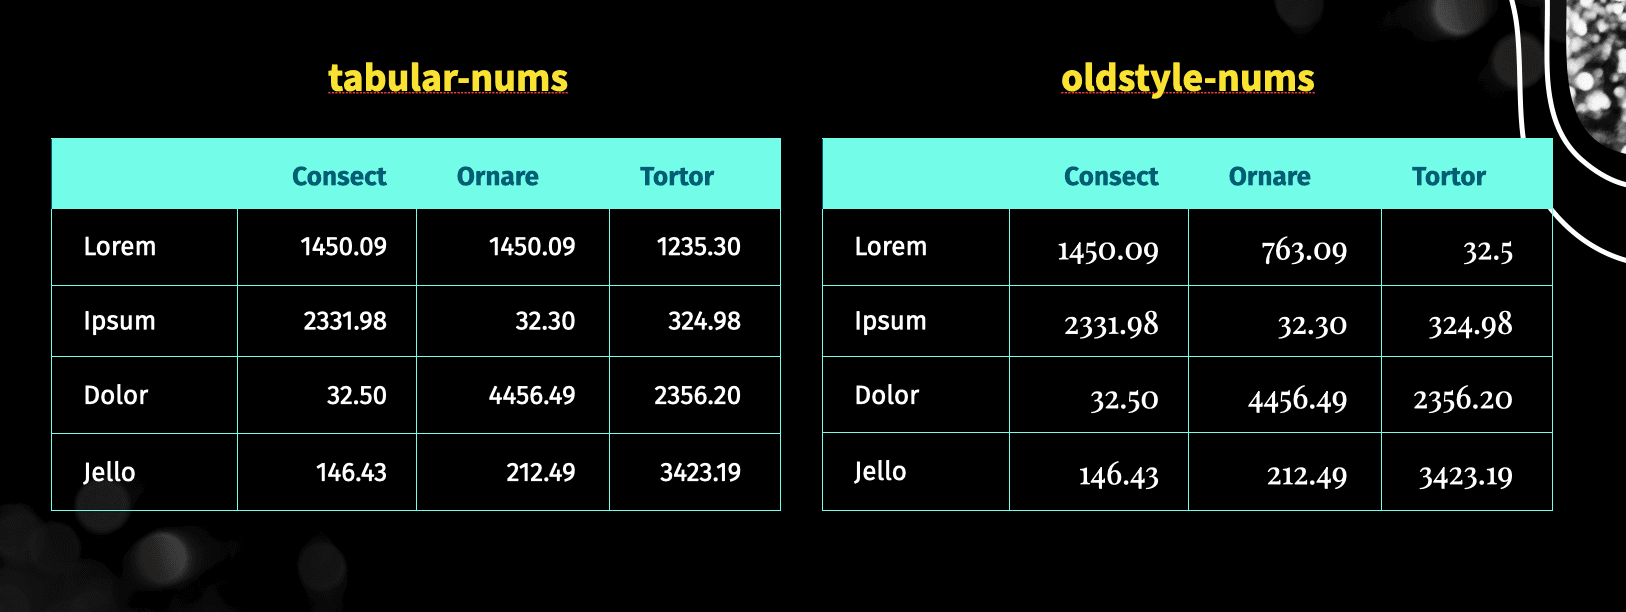 Example image demonstrating the differences in a table between old style numerals and tabular numerals using Playfair Display it demonstrates that old style numerals in a table make it difficult to read the data 